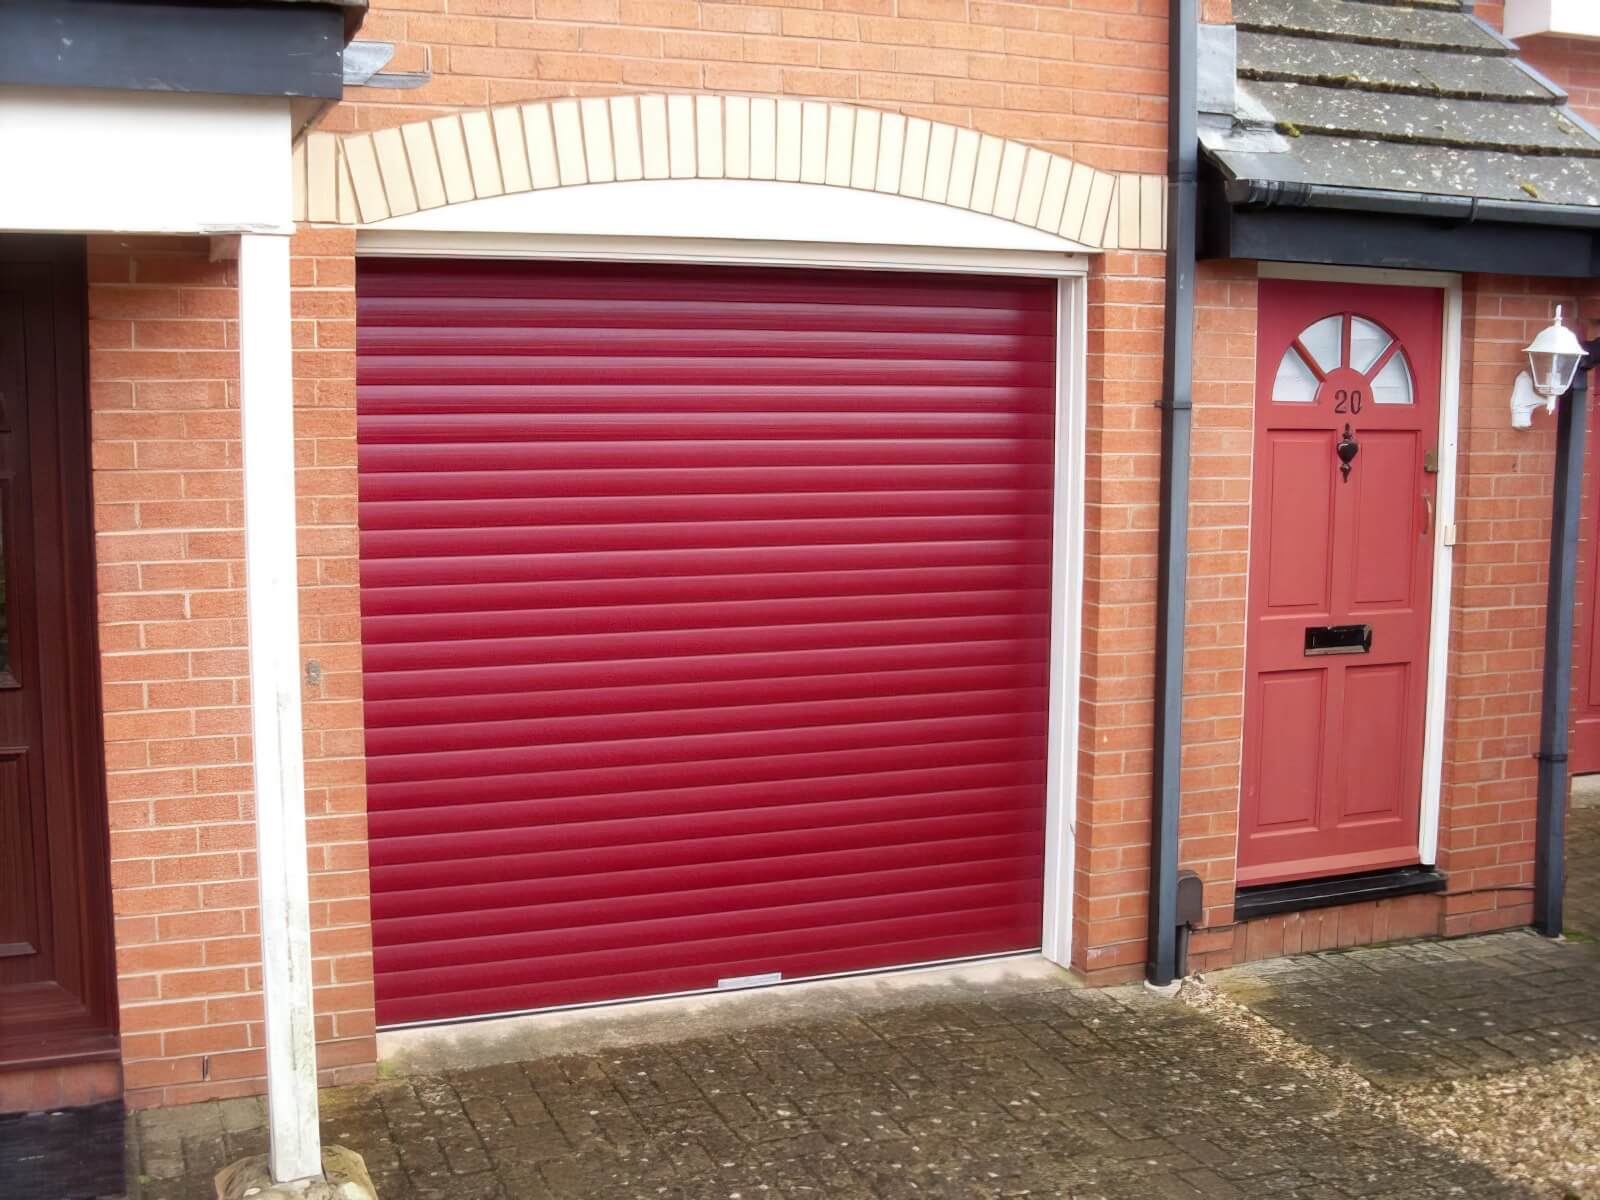 Qualified Plymouth Roller Garage Doors experts